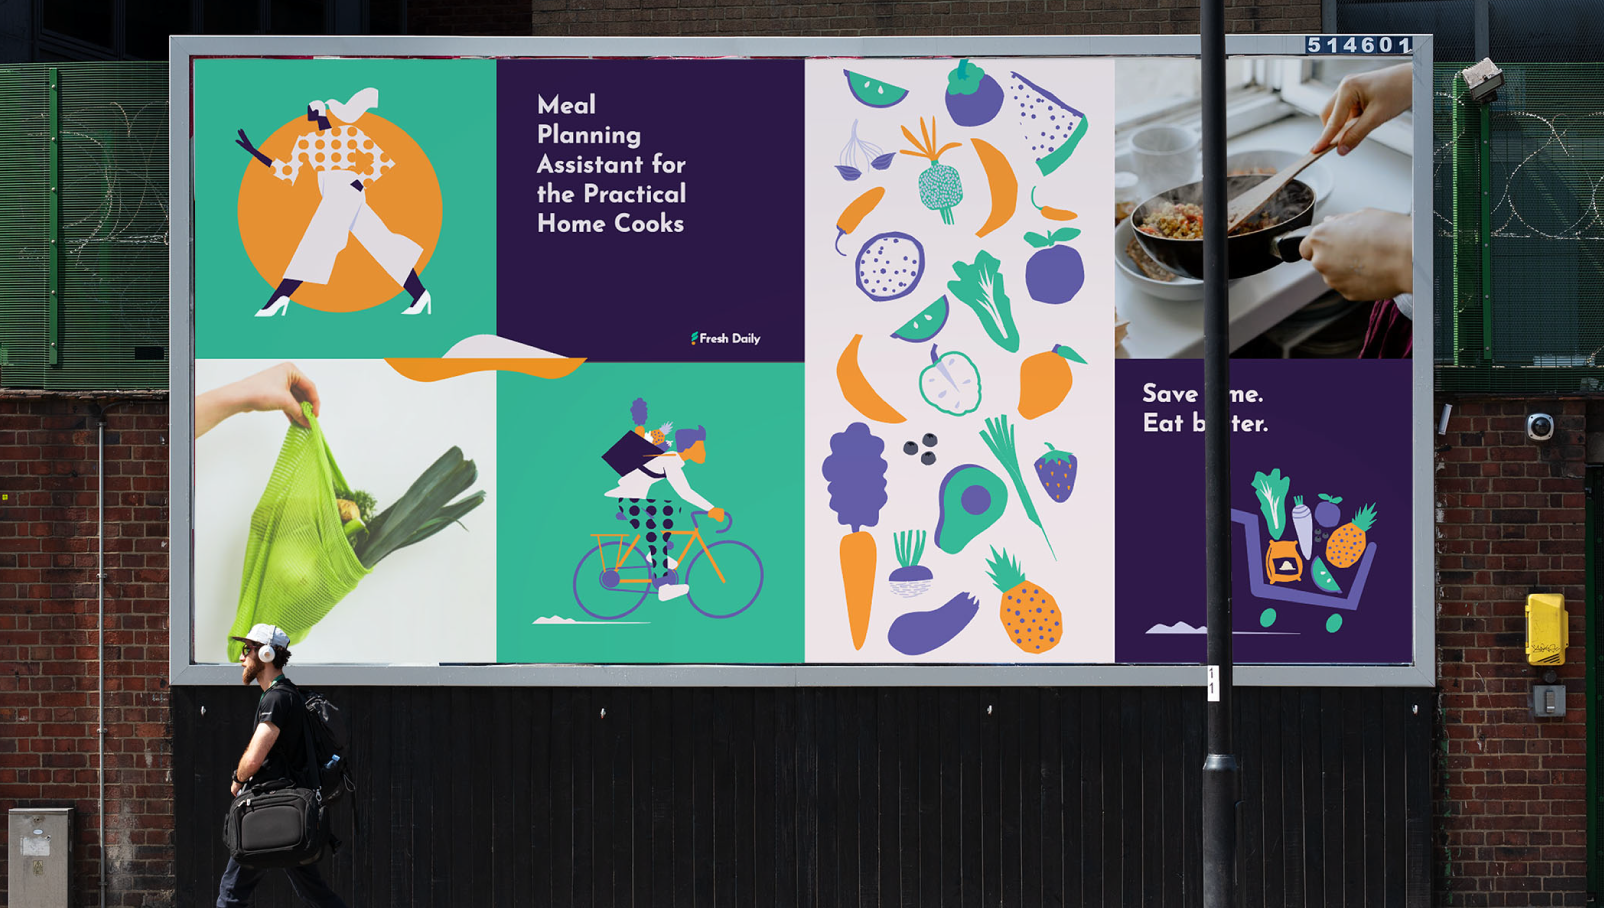 A wall advertisement with illustrations of food ingredients, a person biking with a bag of groceries and photos of a person cooking and a bag of vegetables.